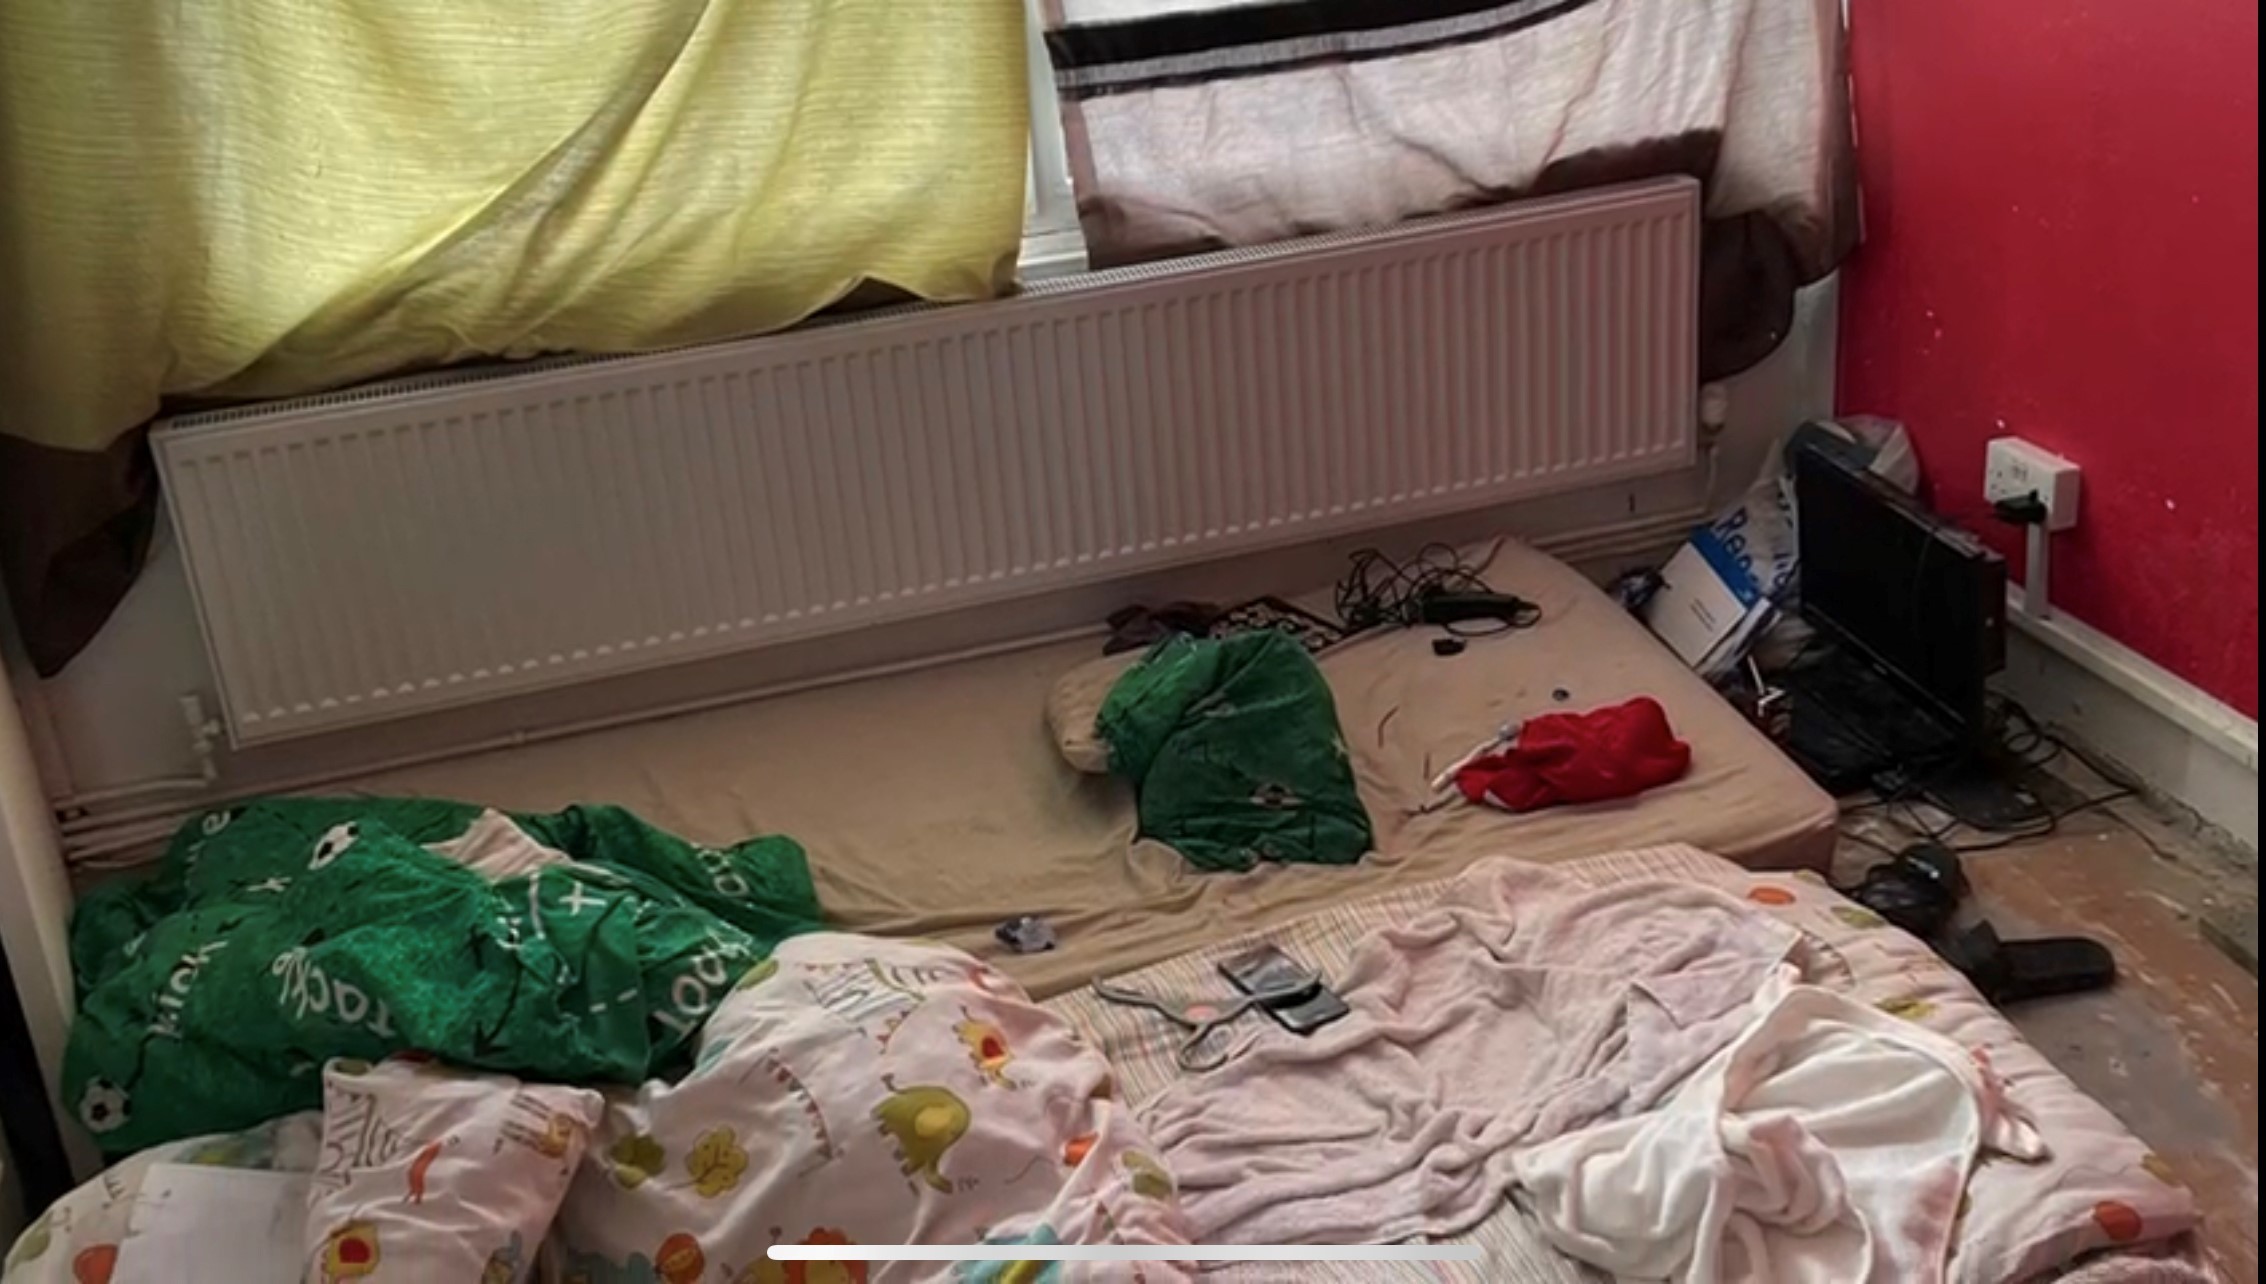 A family was living in social housing with limited furniture and in dangerous condition